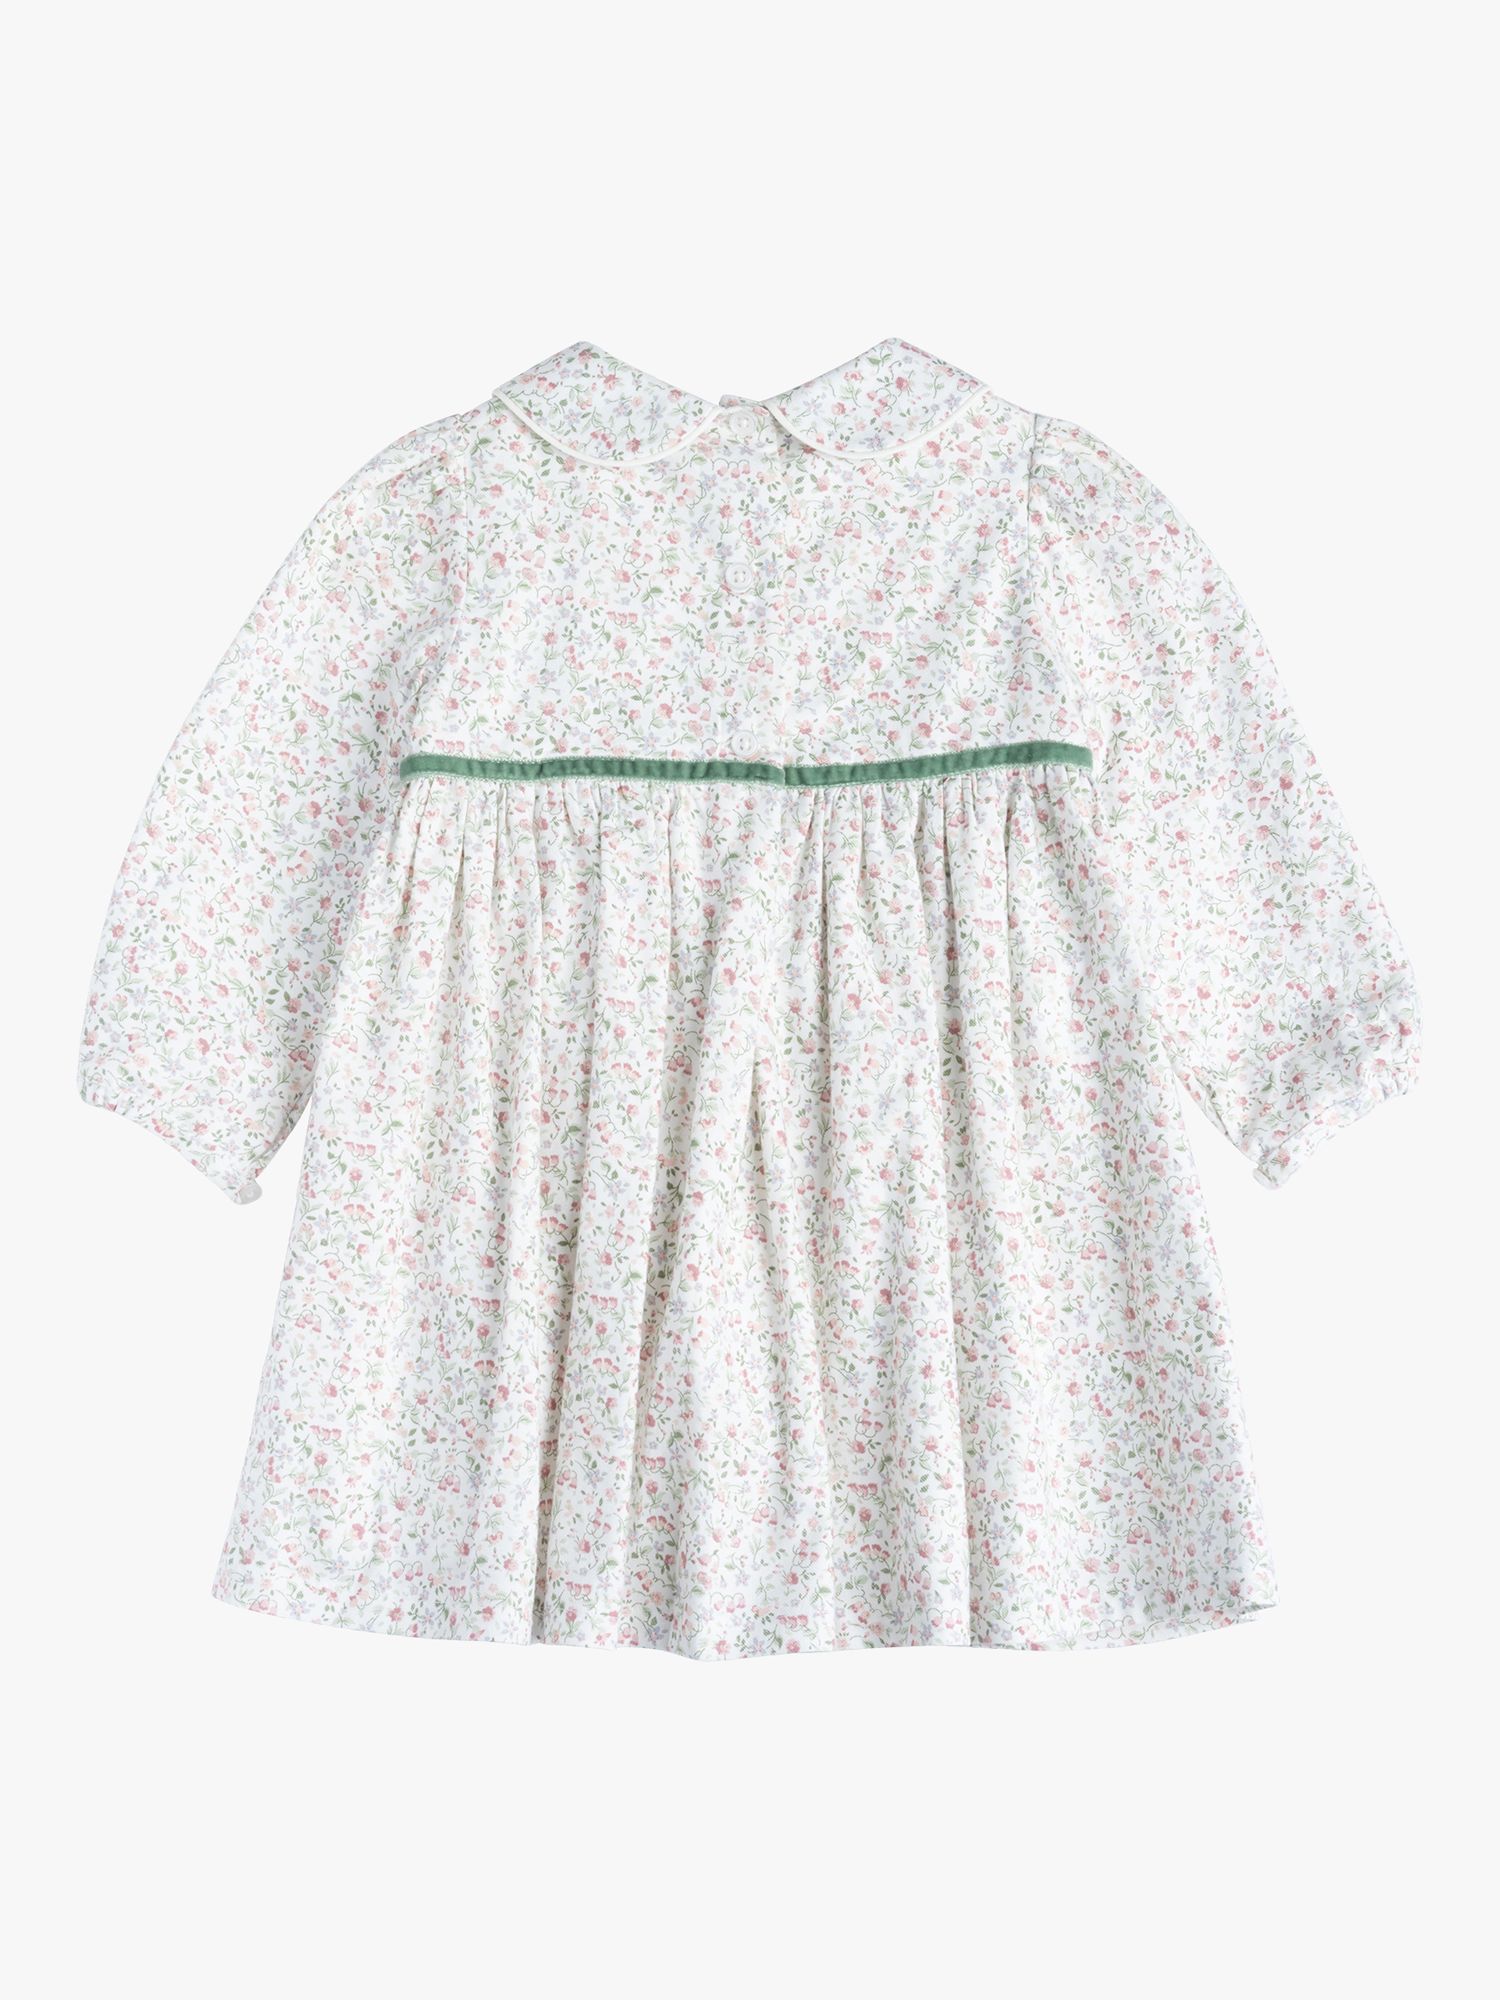 Trotters Baby Aubrey Floral Print Dress, White/Pink at John Lewis ...